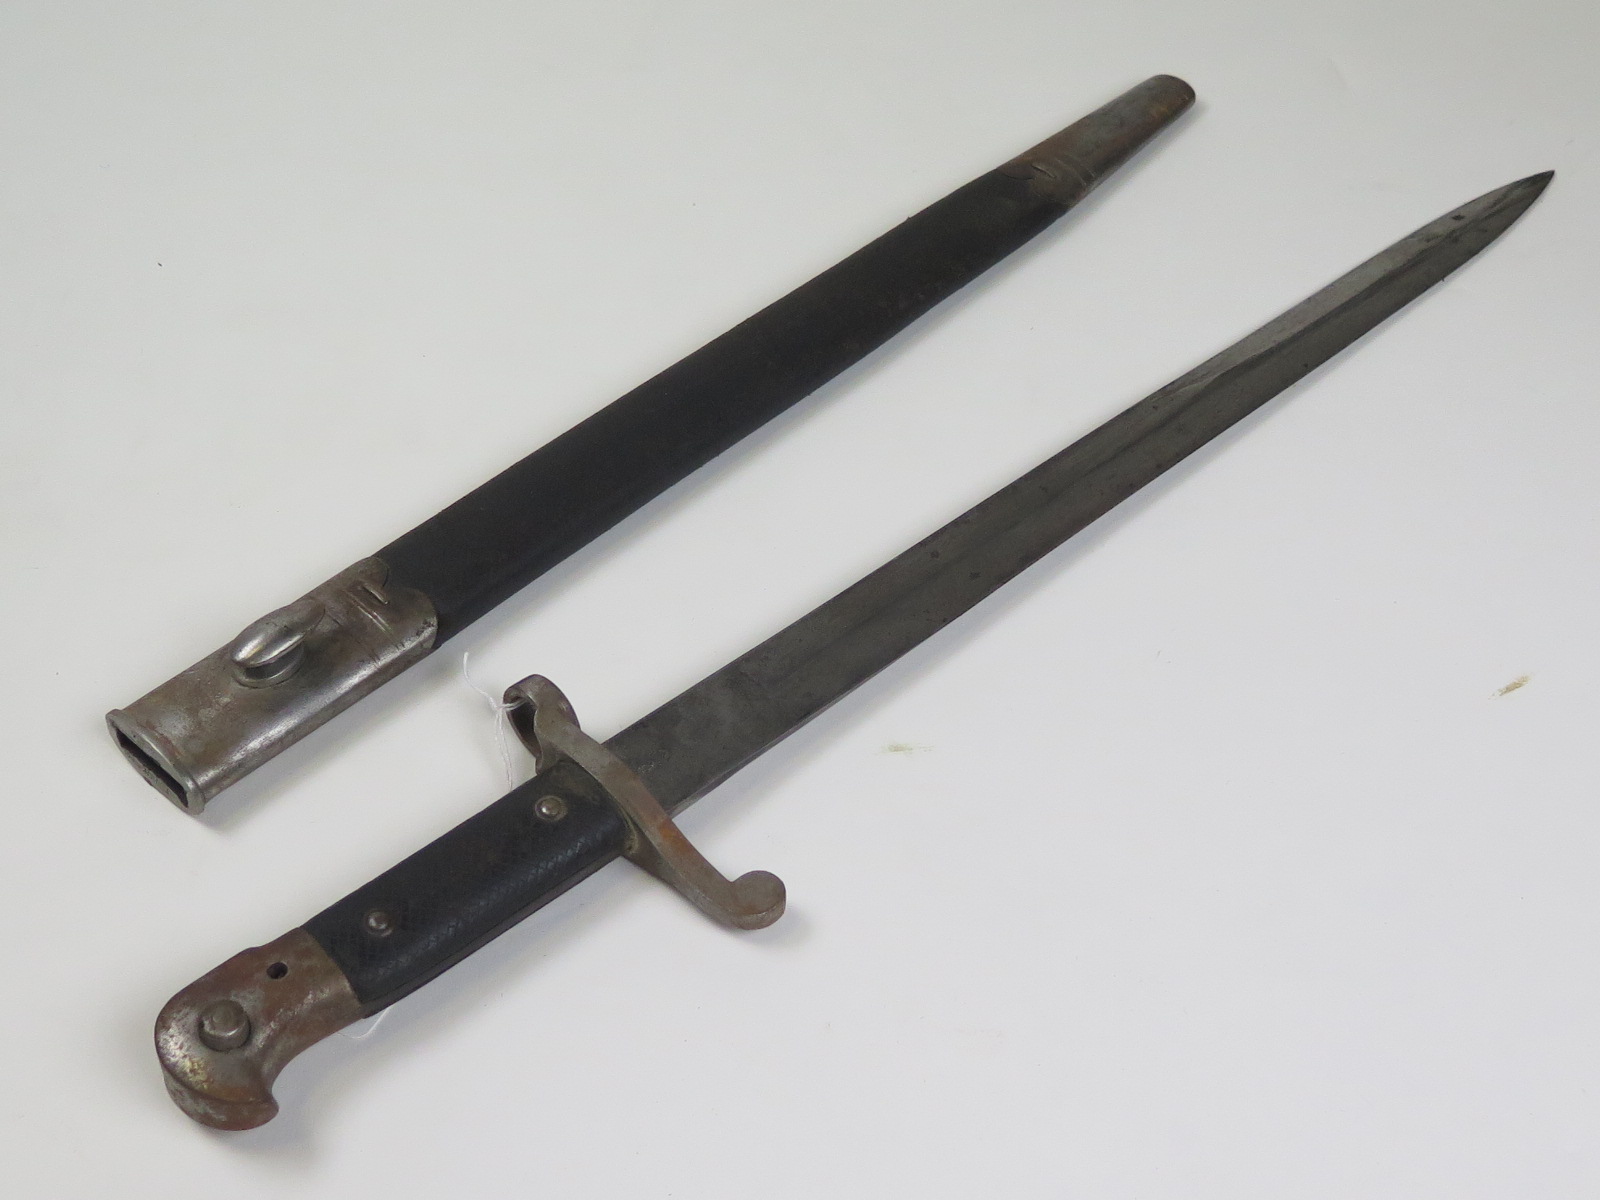 Bayonet: An 1887 MKII sword bayonet for the Martini Henry rifle. W/D marked and made by Wilkinson.